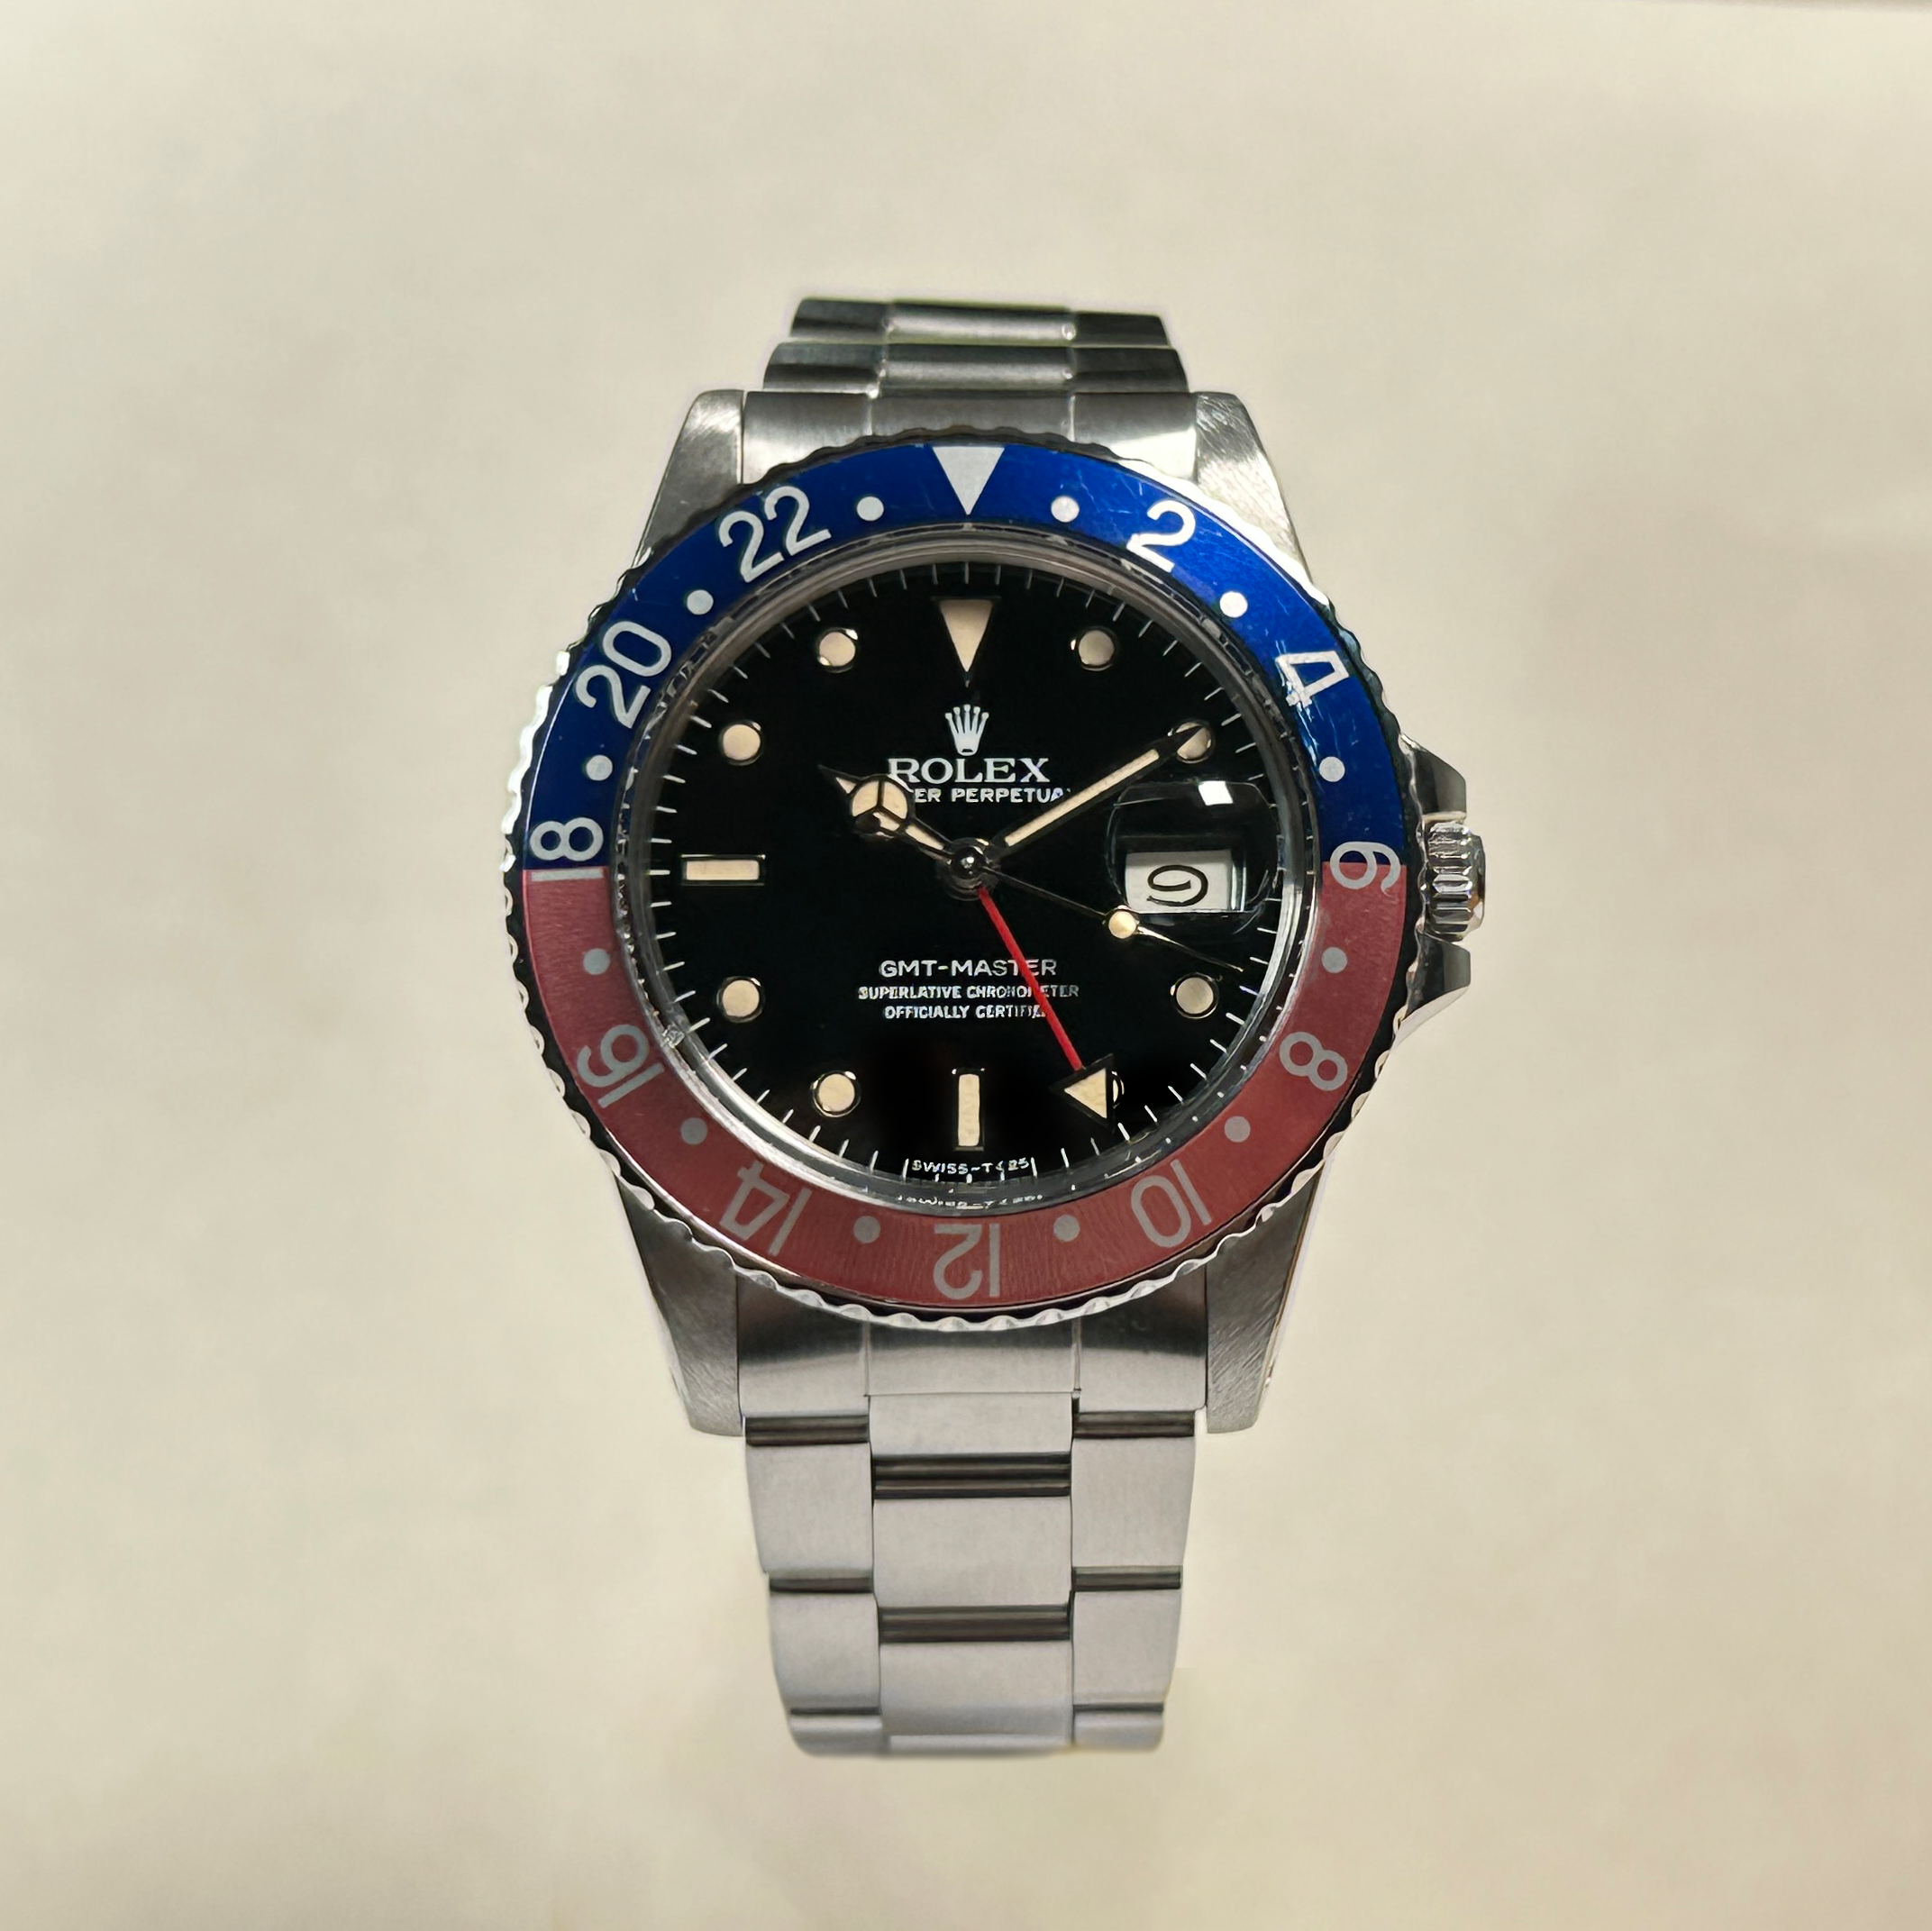 Rolex GMT-Master Ref. 16750 Perfect “No Date” Dial